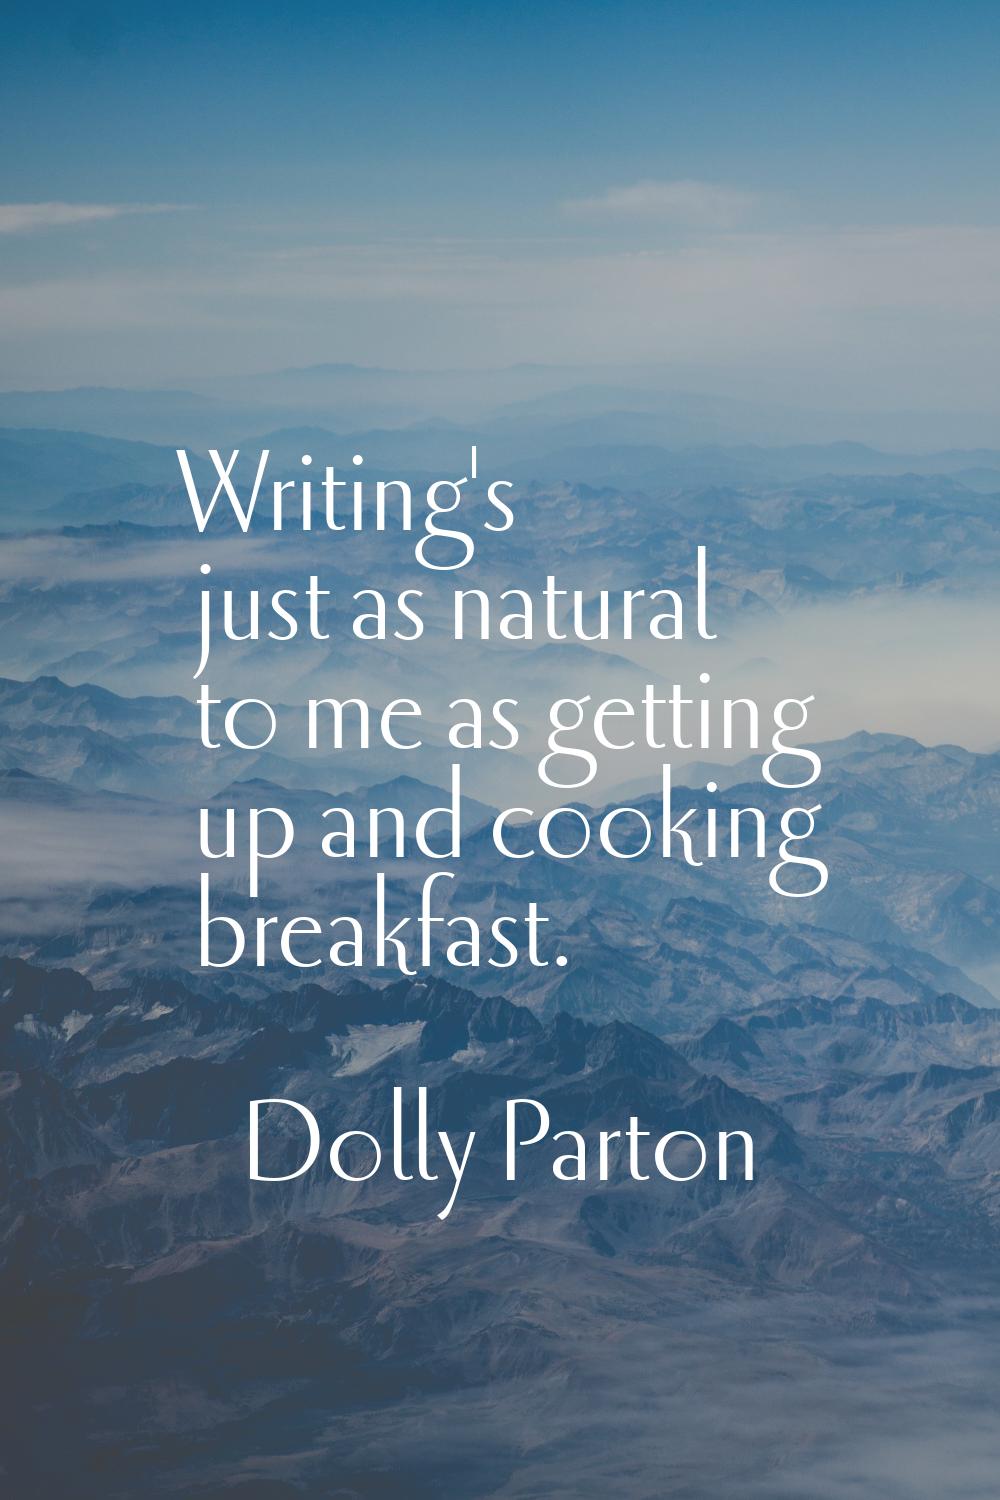 Writing's just as natural to me as getting up and cooking breakfast.